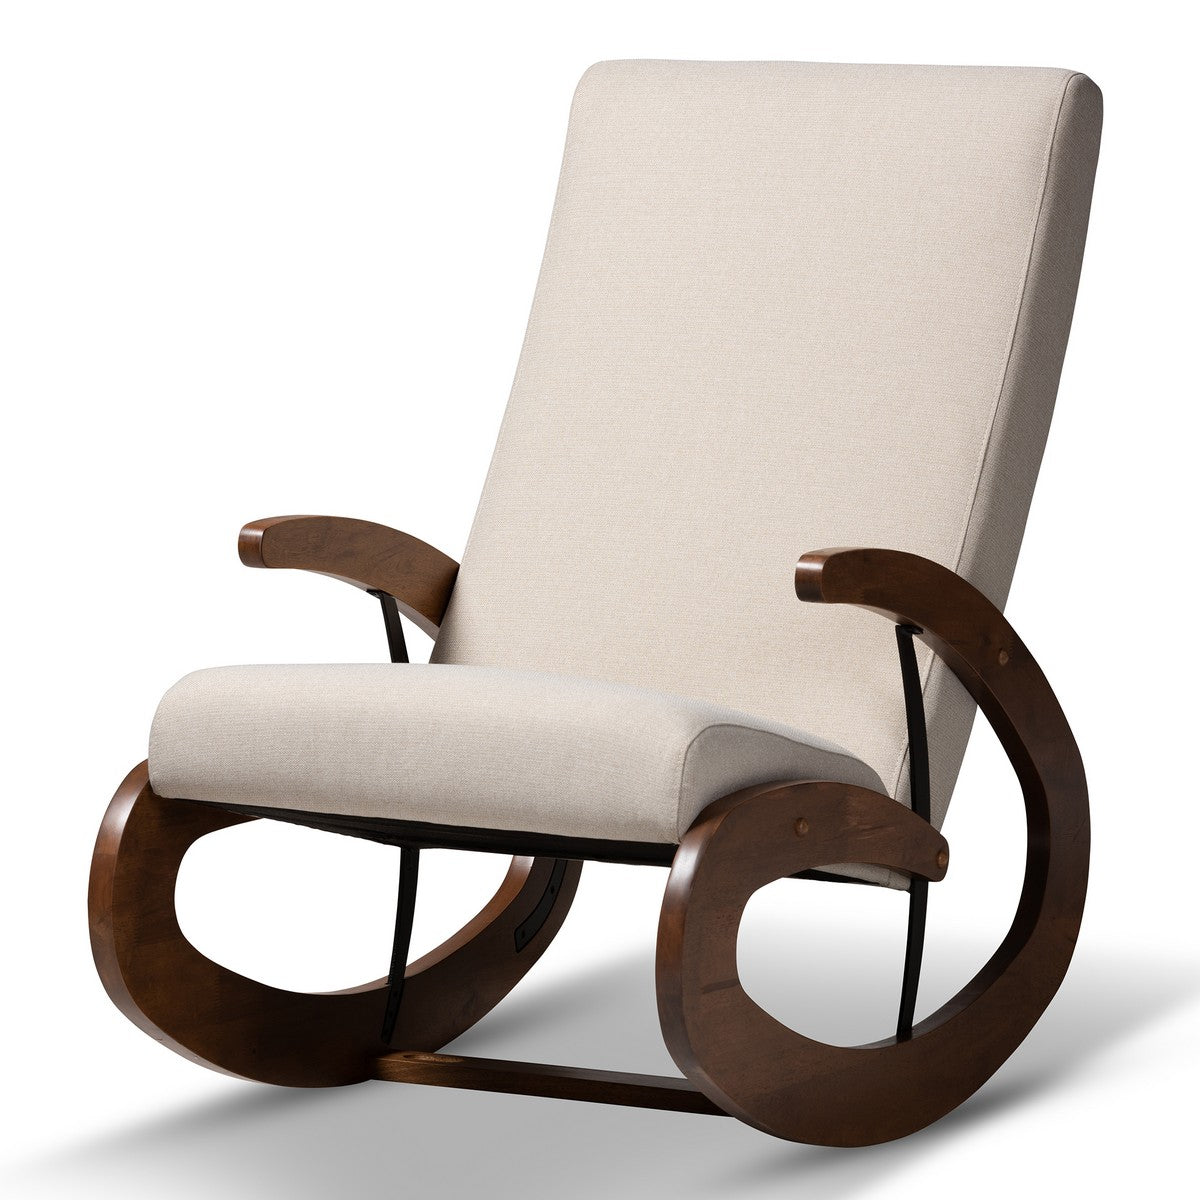 Baxton Studio Kaira Modern and Contemporary Light Beige Fabric Upholstered and Walnut-Finished Wood Rocking Chair Baxton Studio-Rocking Chairs-Minimal And Modern - 1